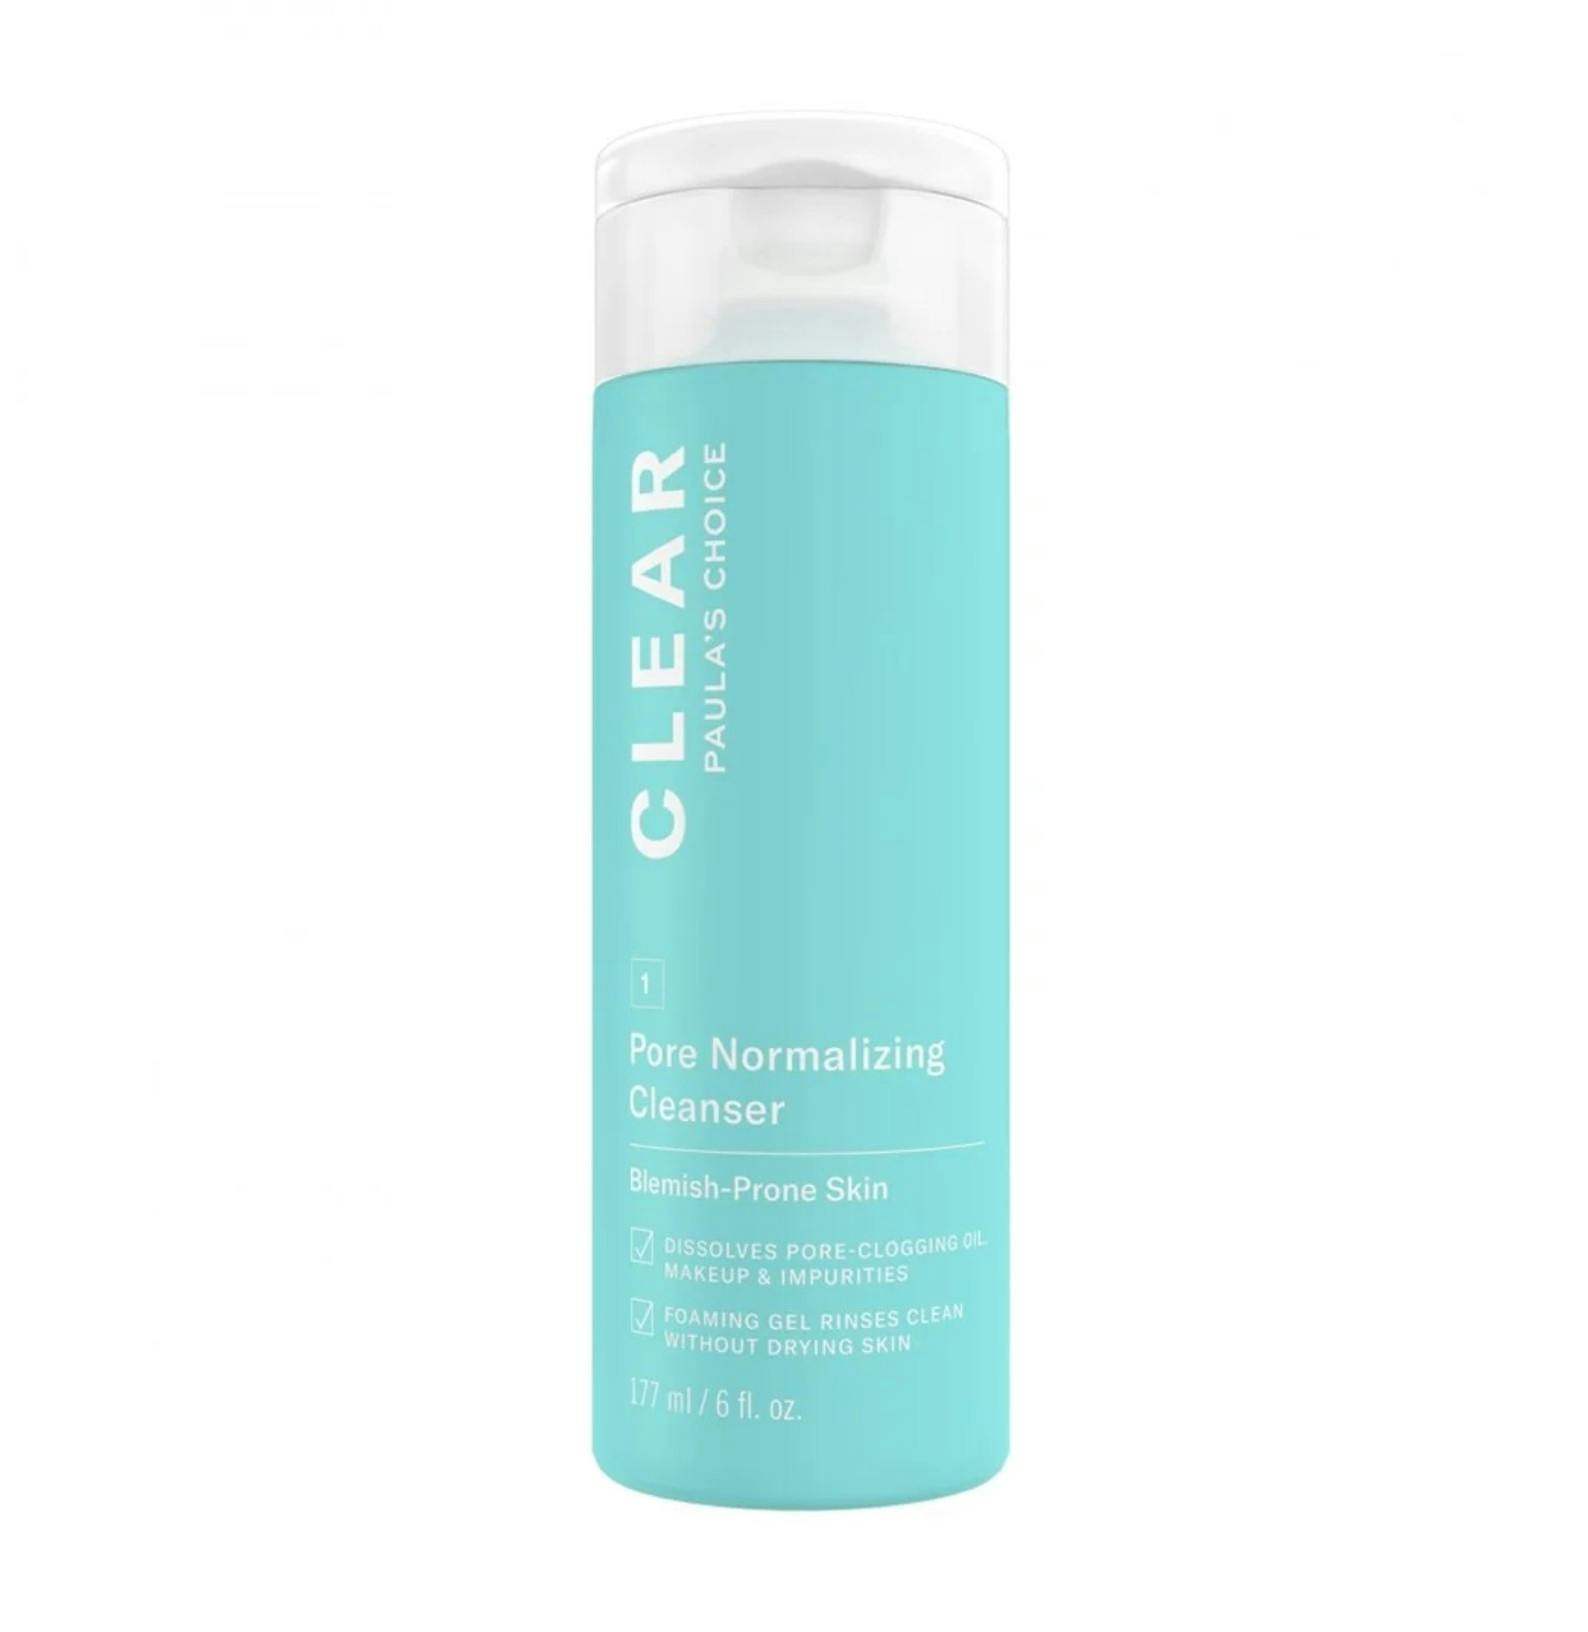 Clear cleanser